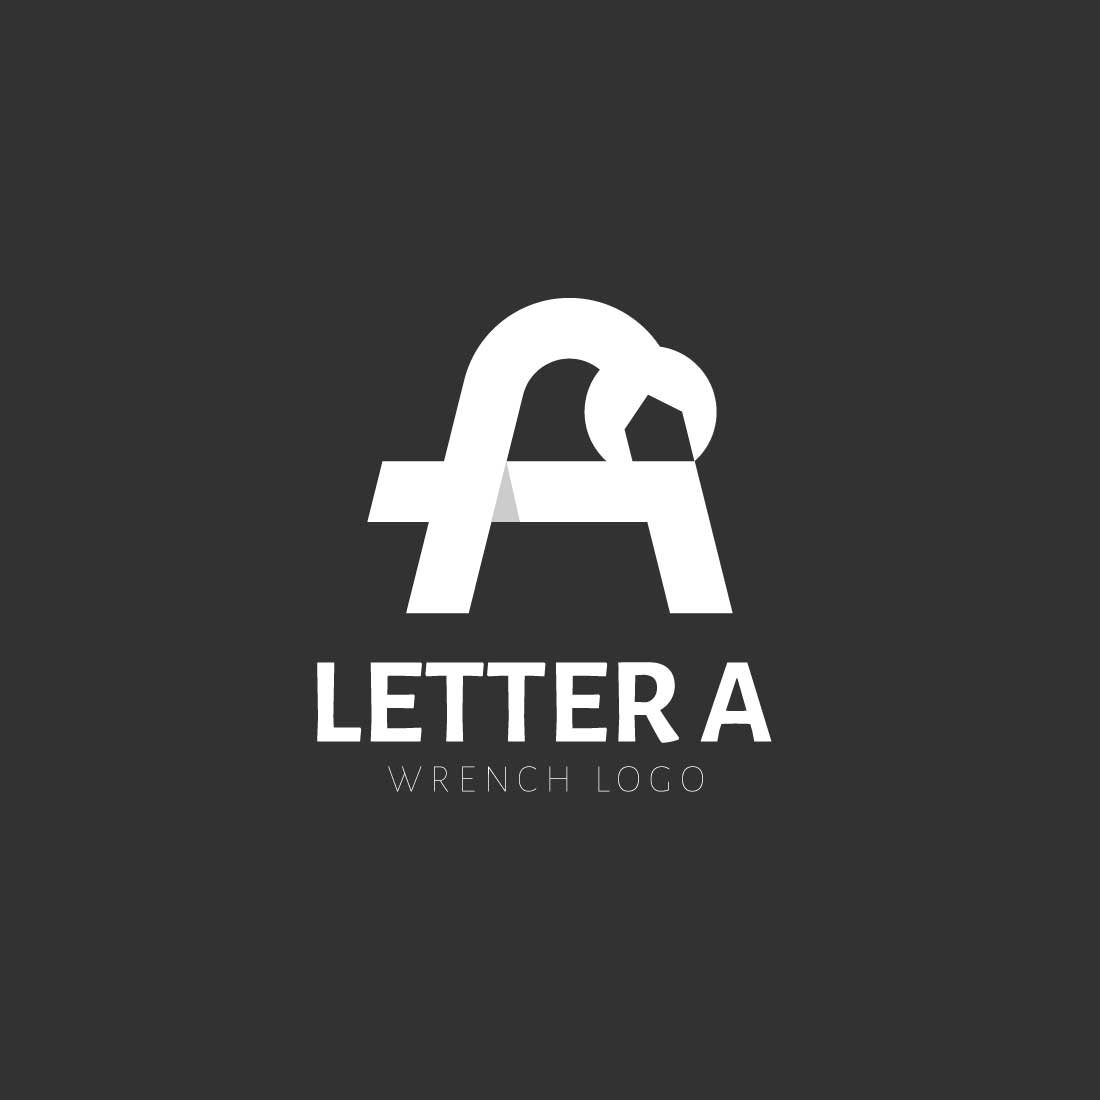 Letter A wrench initials logo preview image.